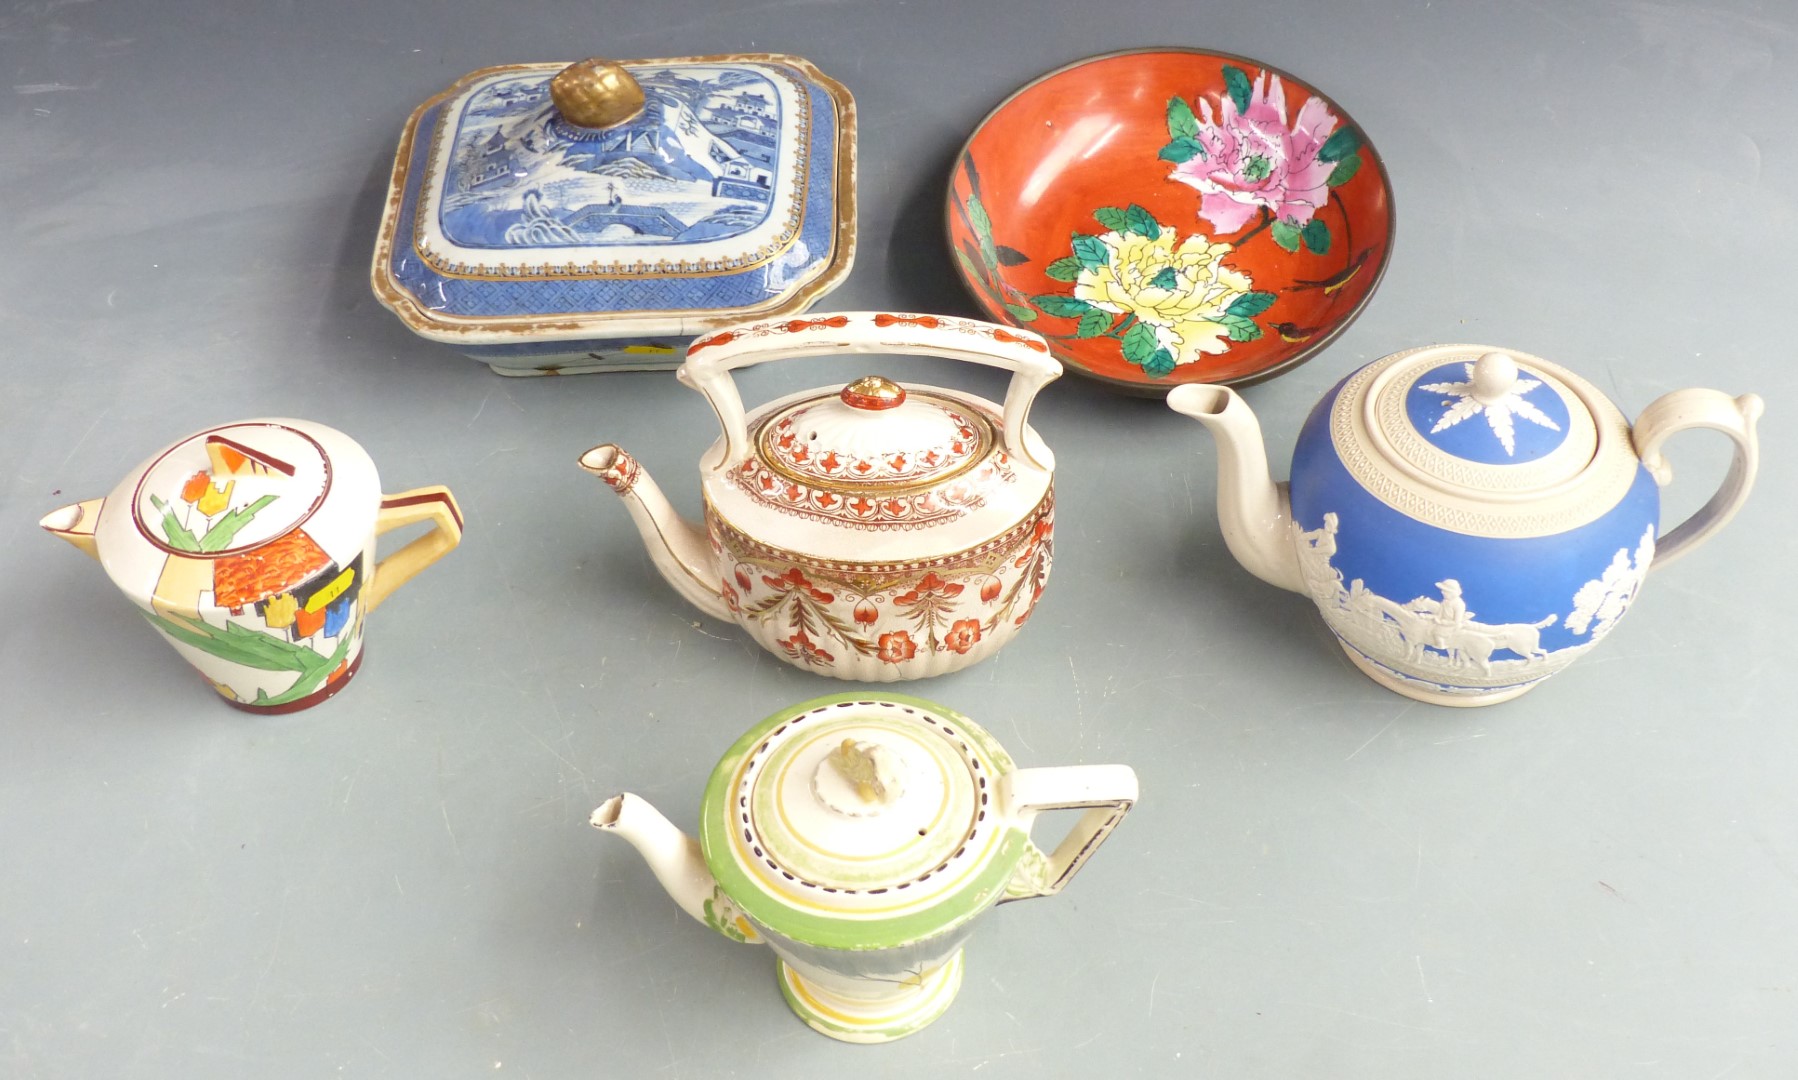 Russian enamelled porcelain dish with metal surround, four teapots including Copeland and Art Deco